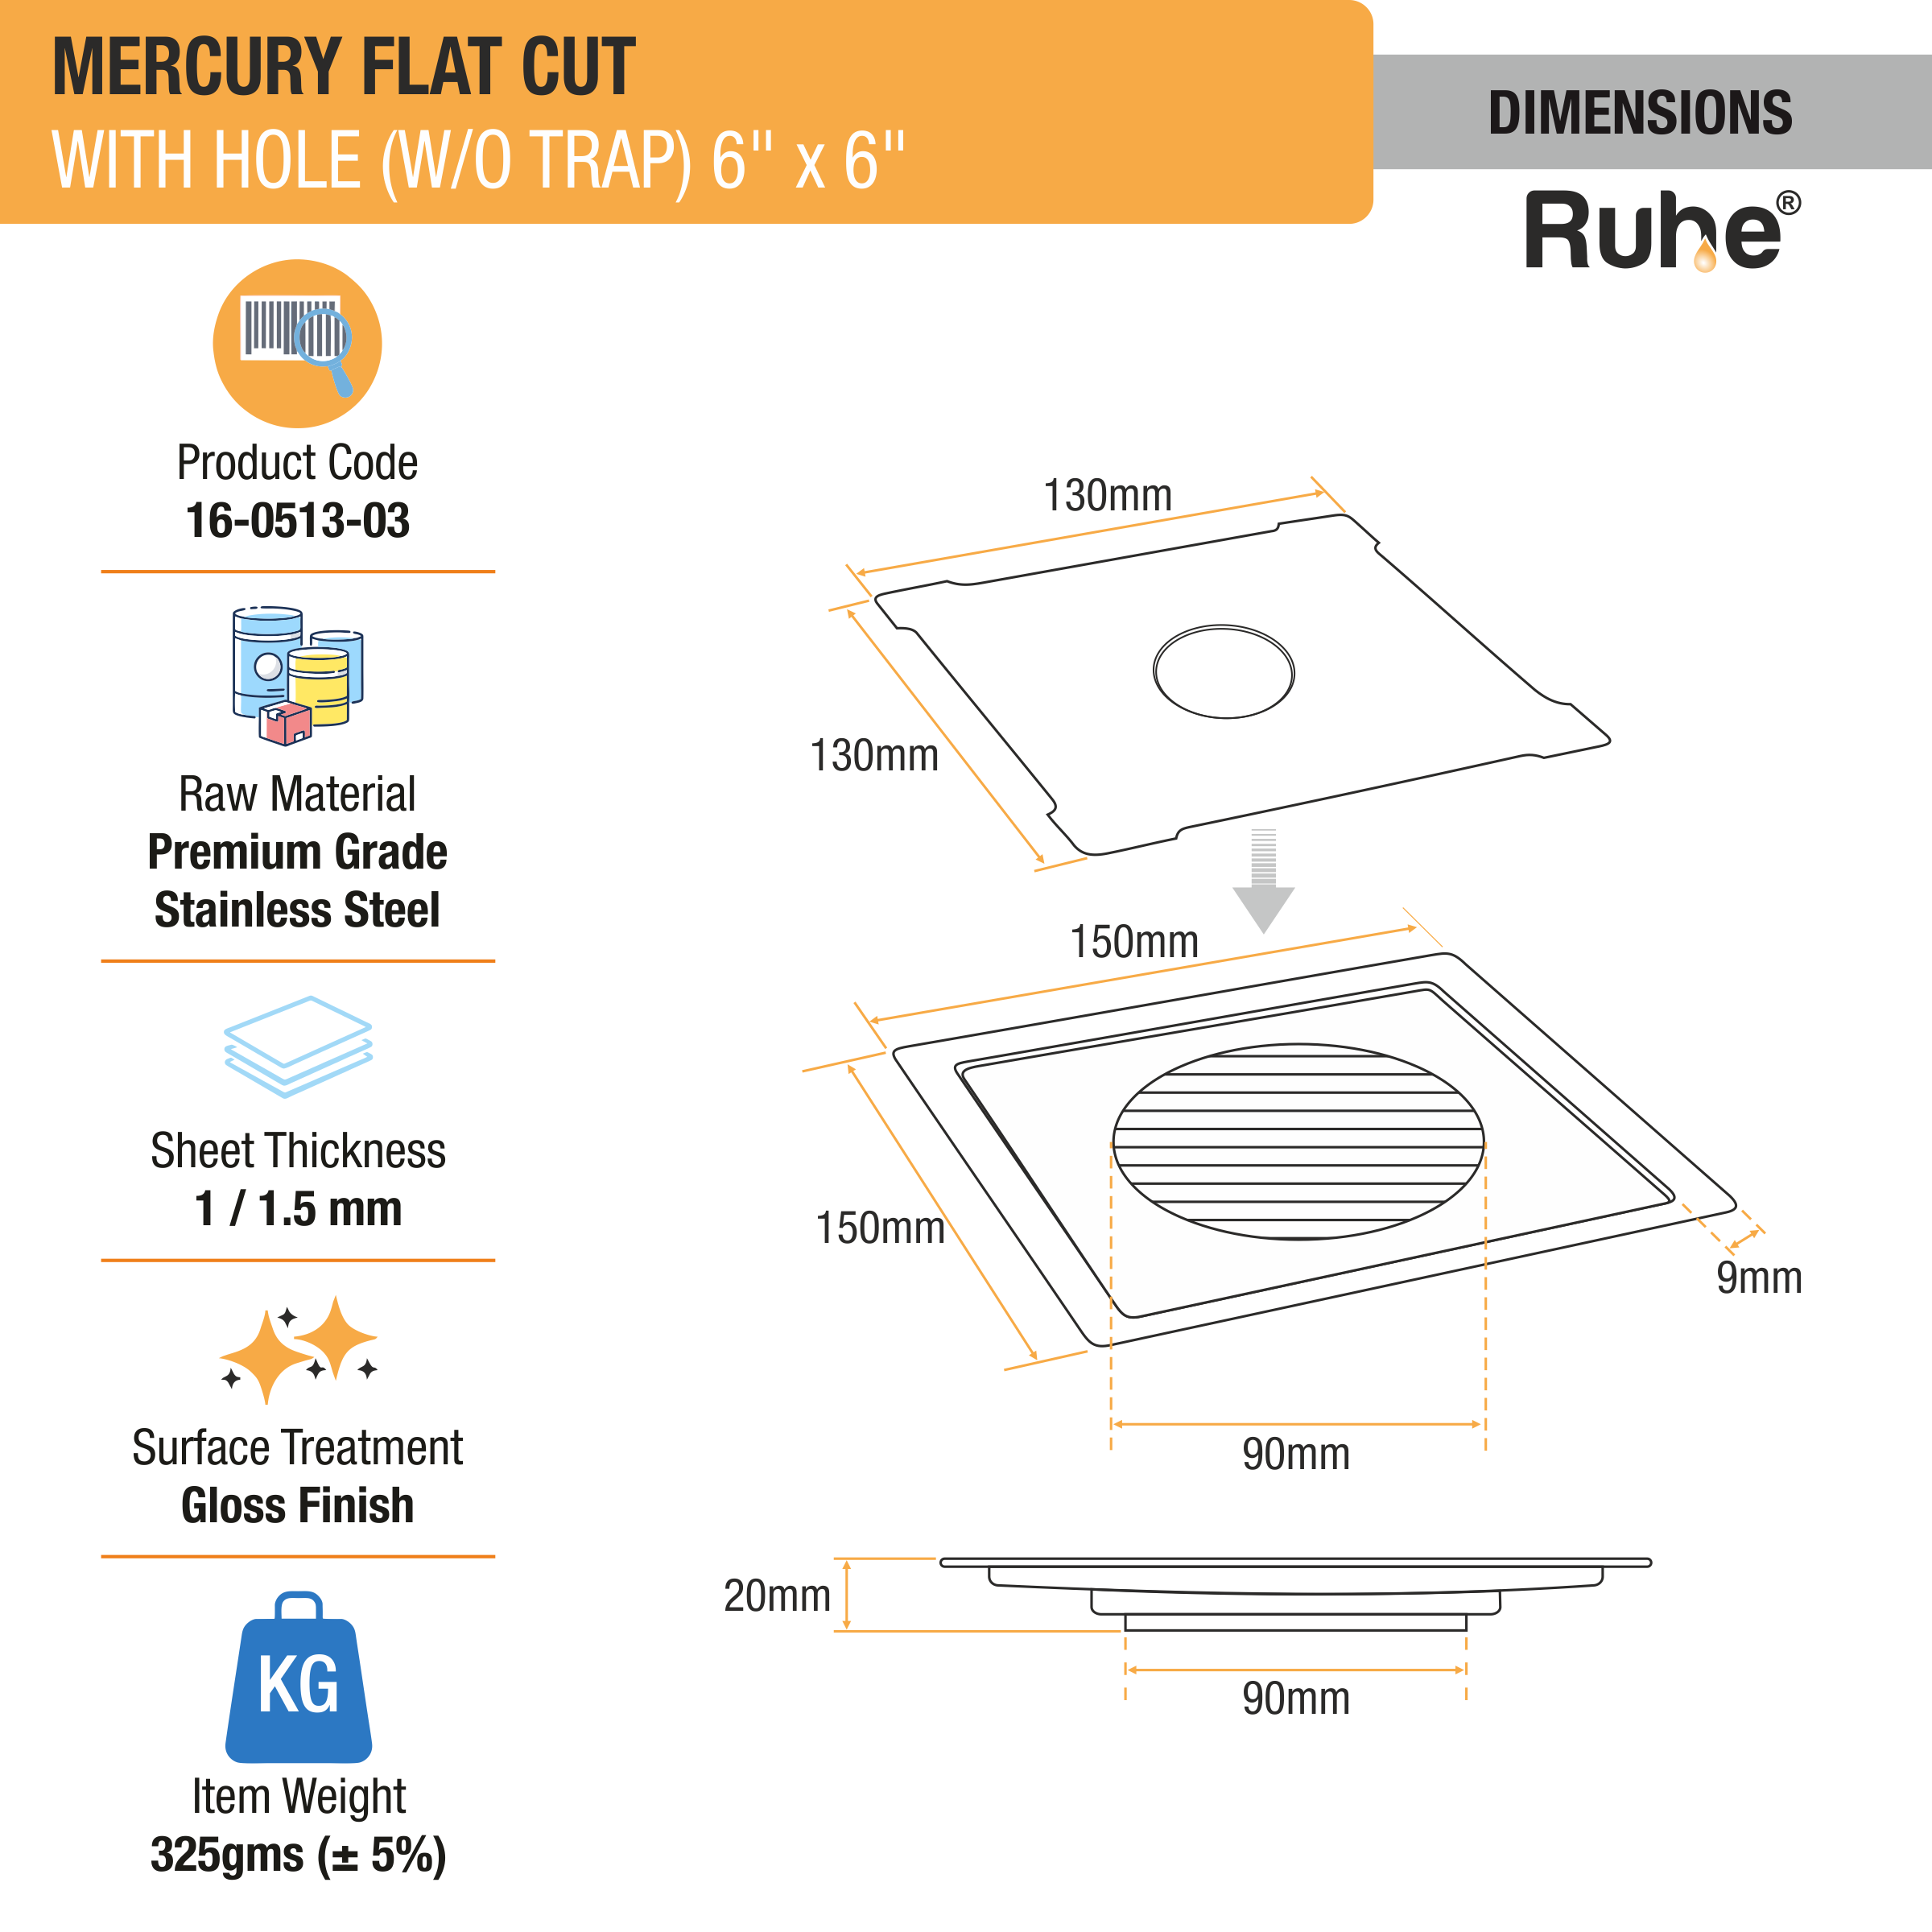 Mercury Square Premium Flat Cut Floor Drain (6 x 6 Inches) with Hole dimensions and sizes